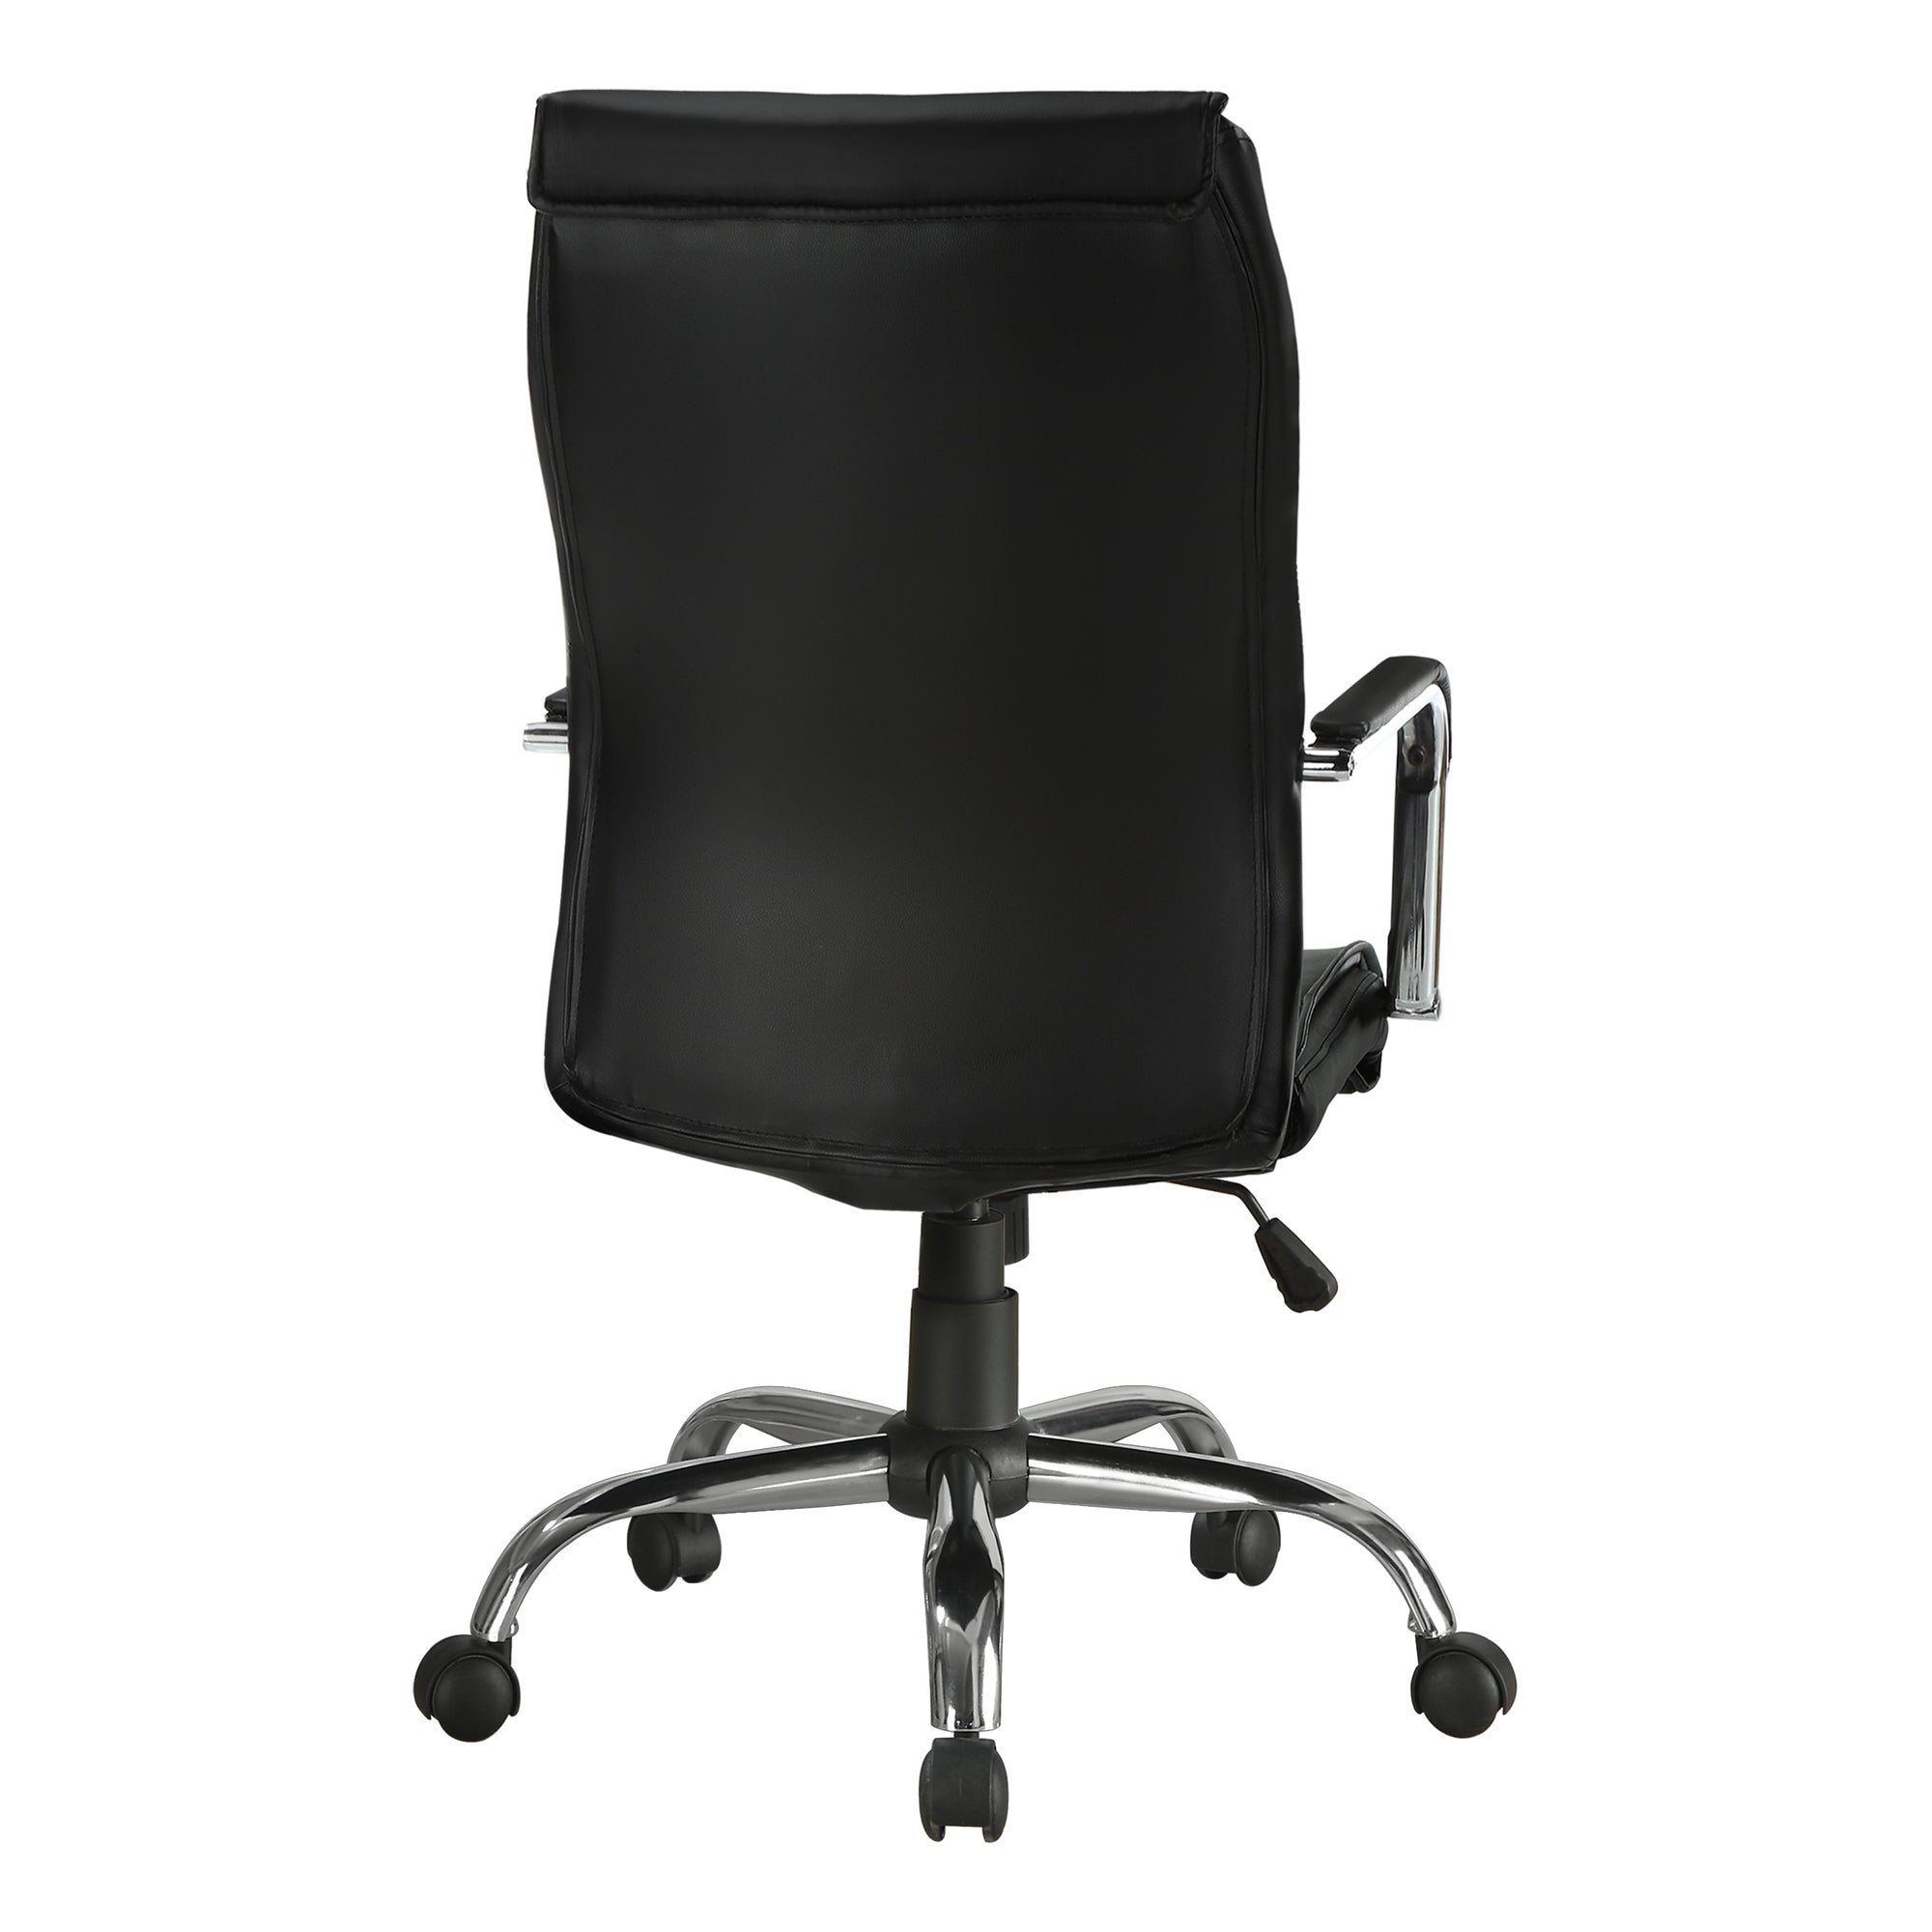 Office Chair - Black Leather-Look Fabric